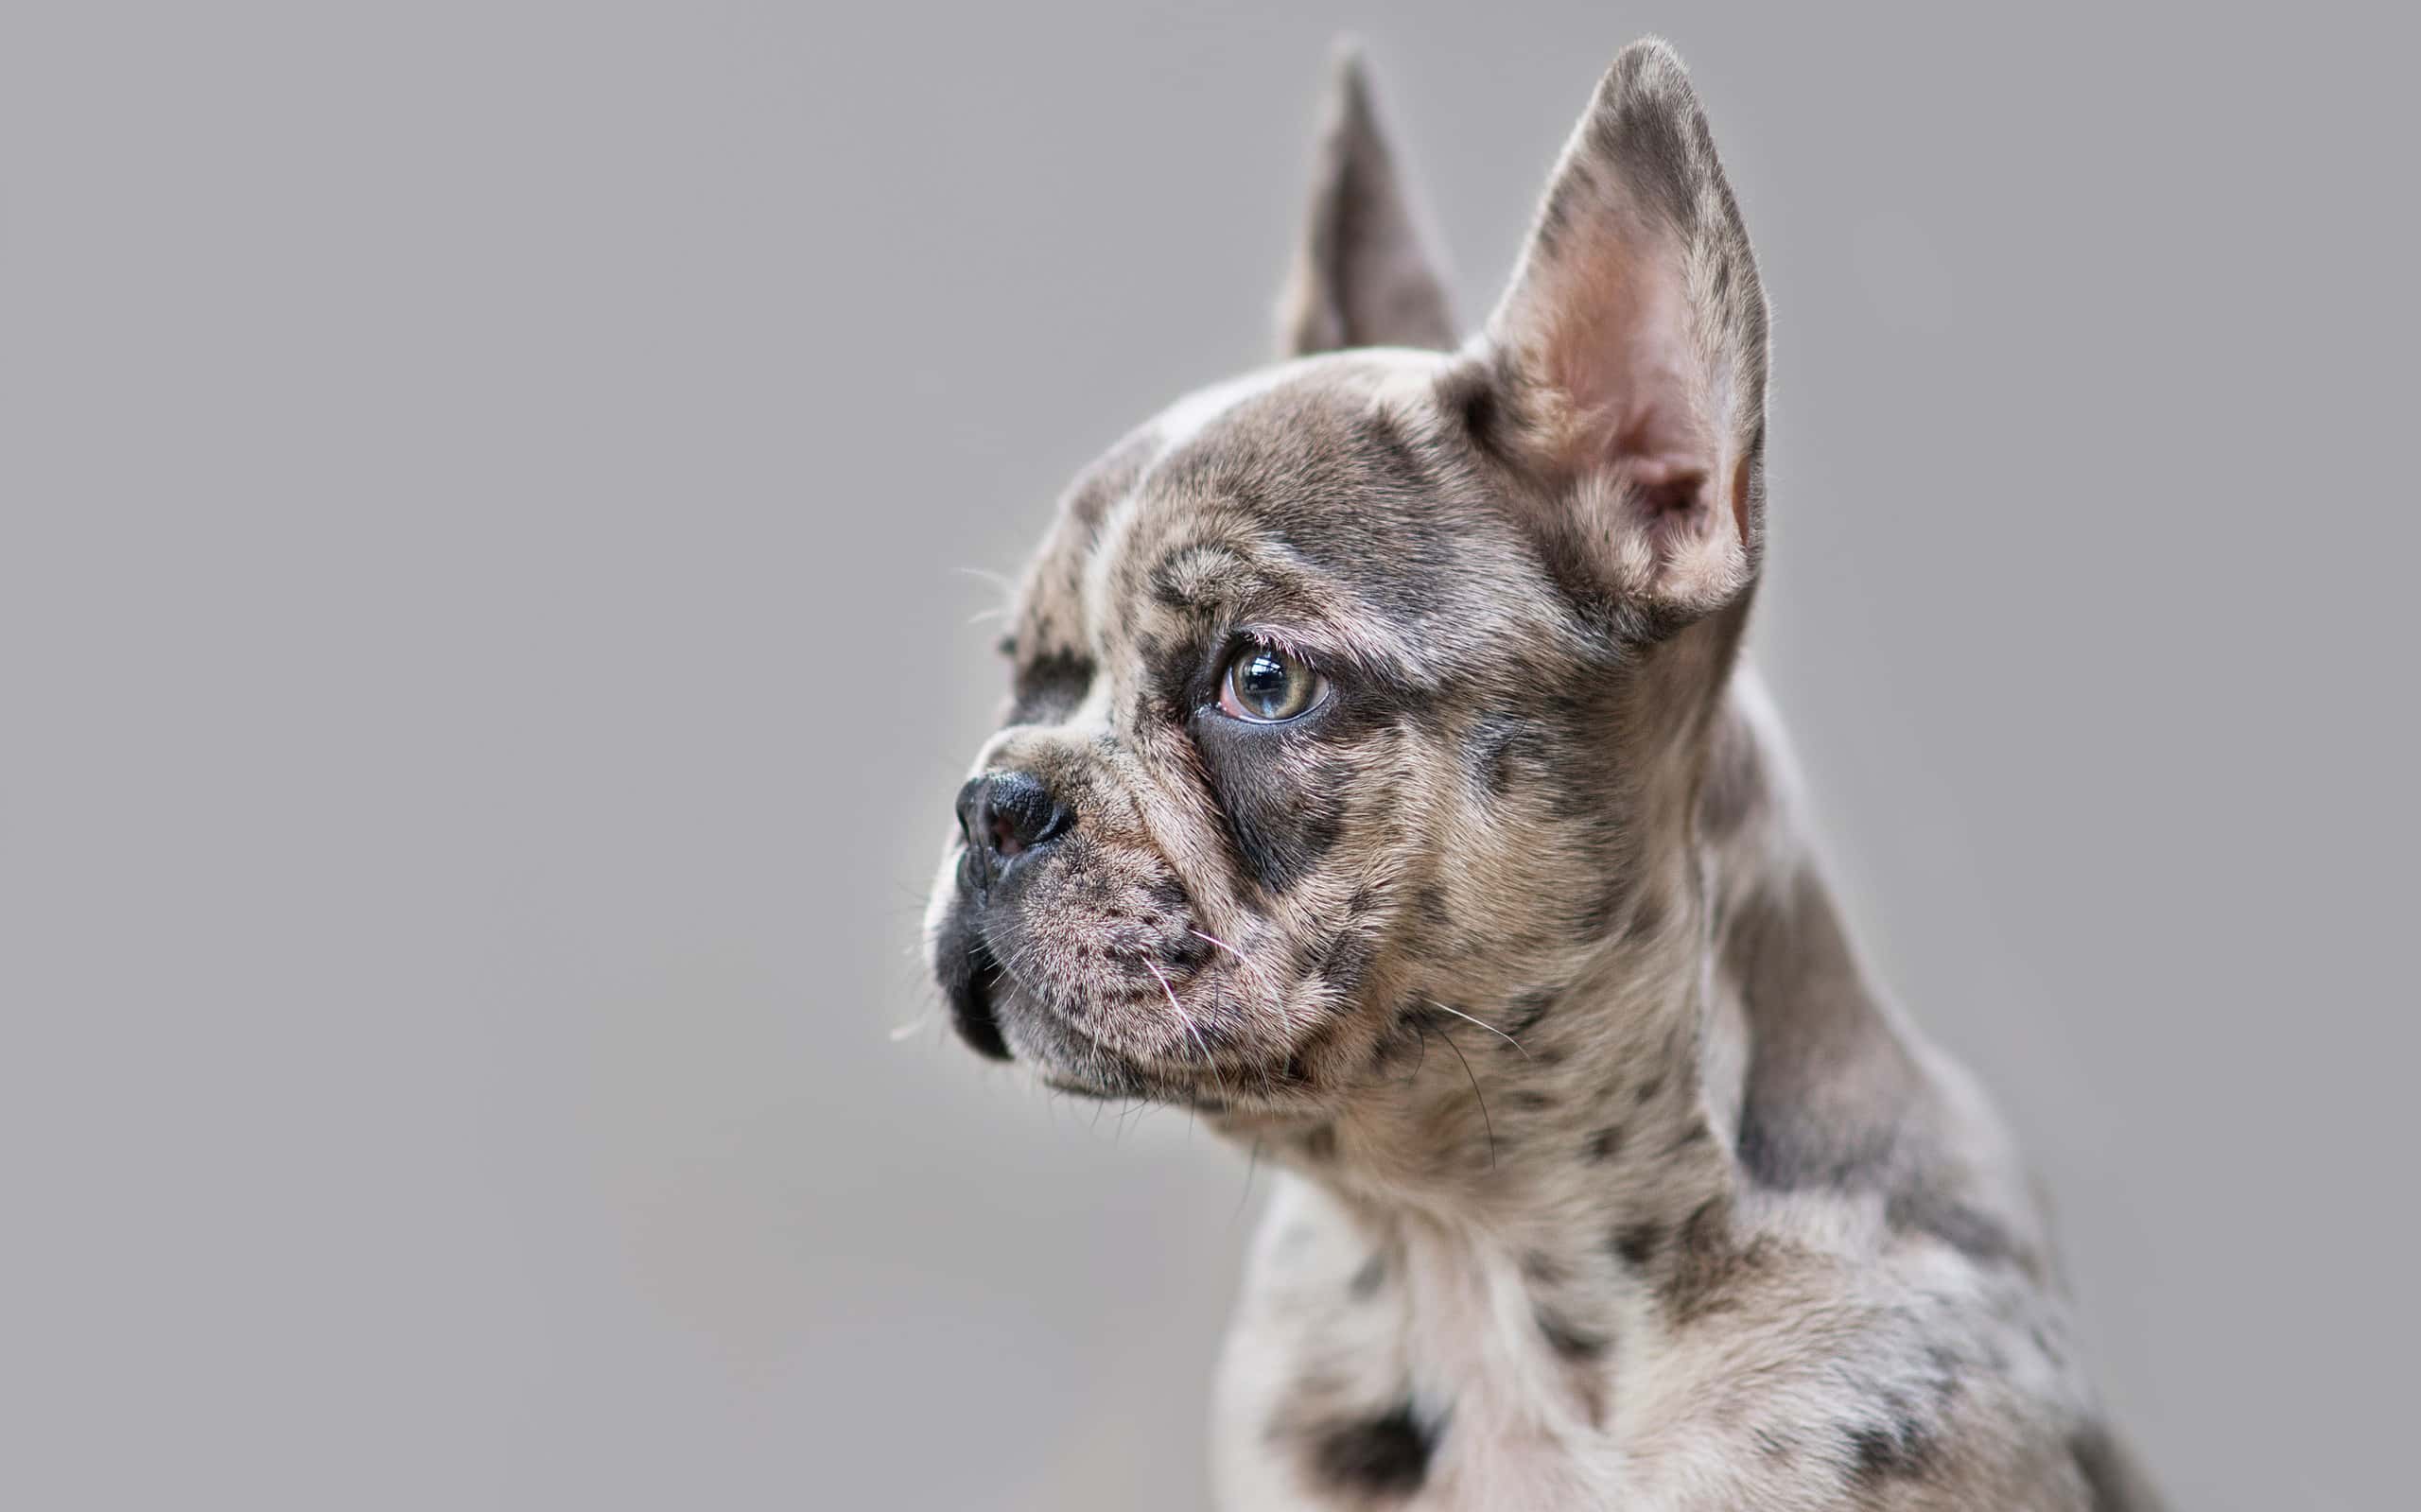 Young merle colored French Bulldog dog puppy with mottled patches